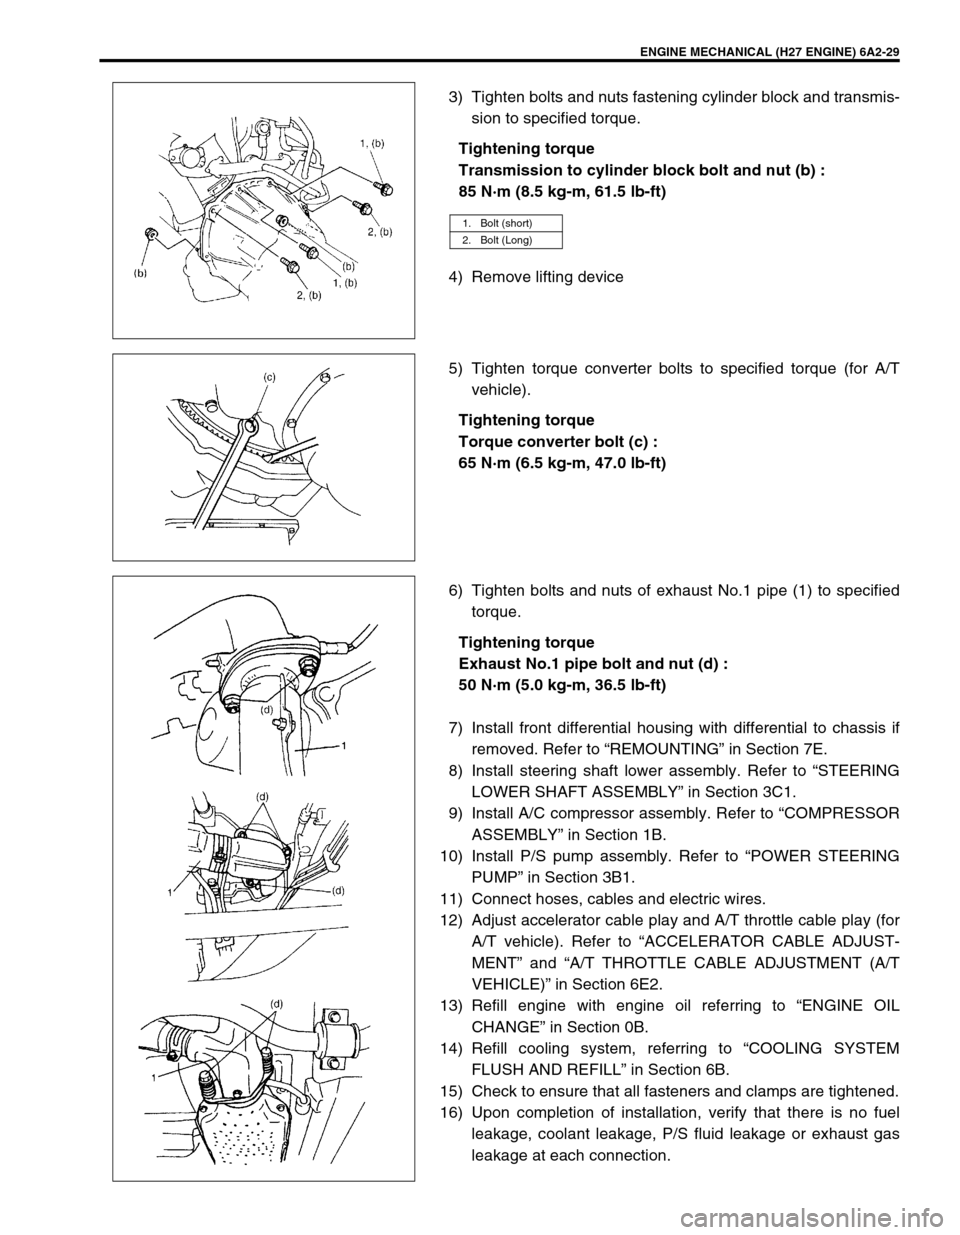 SUZUKI GRAND VITARA 1999 2.G Owners Guide ENGINE MECHANICAL (H27 ENGINE) 6A2-29
3) Tighten bolts and nuts fastening cylinder block and transmis-
sion to specified torque.
Tightening torque
Transmission to cylinder block bolt and nut (b) :
85 